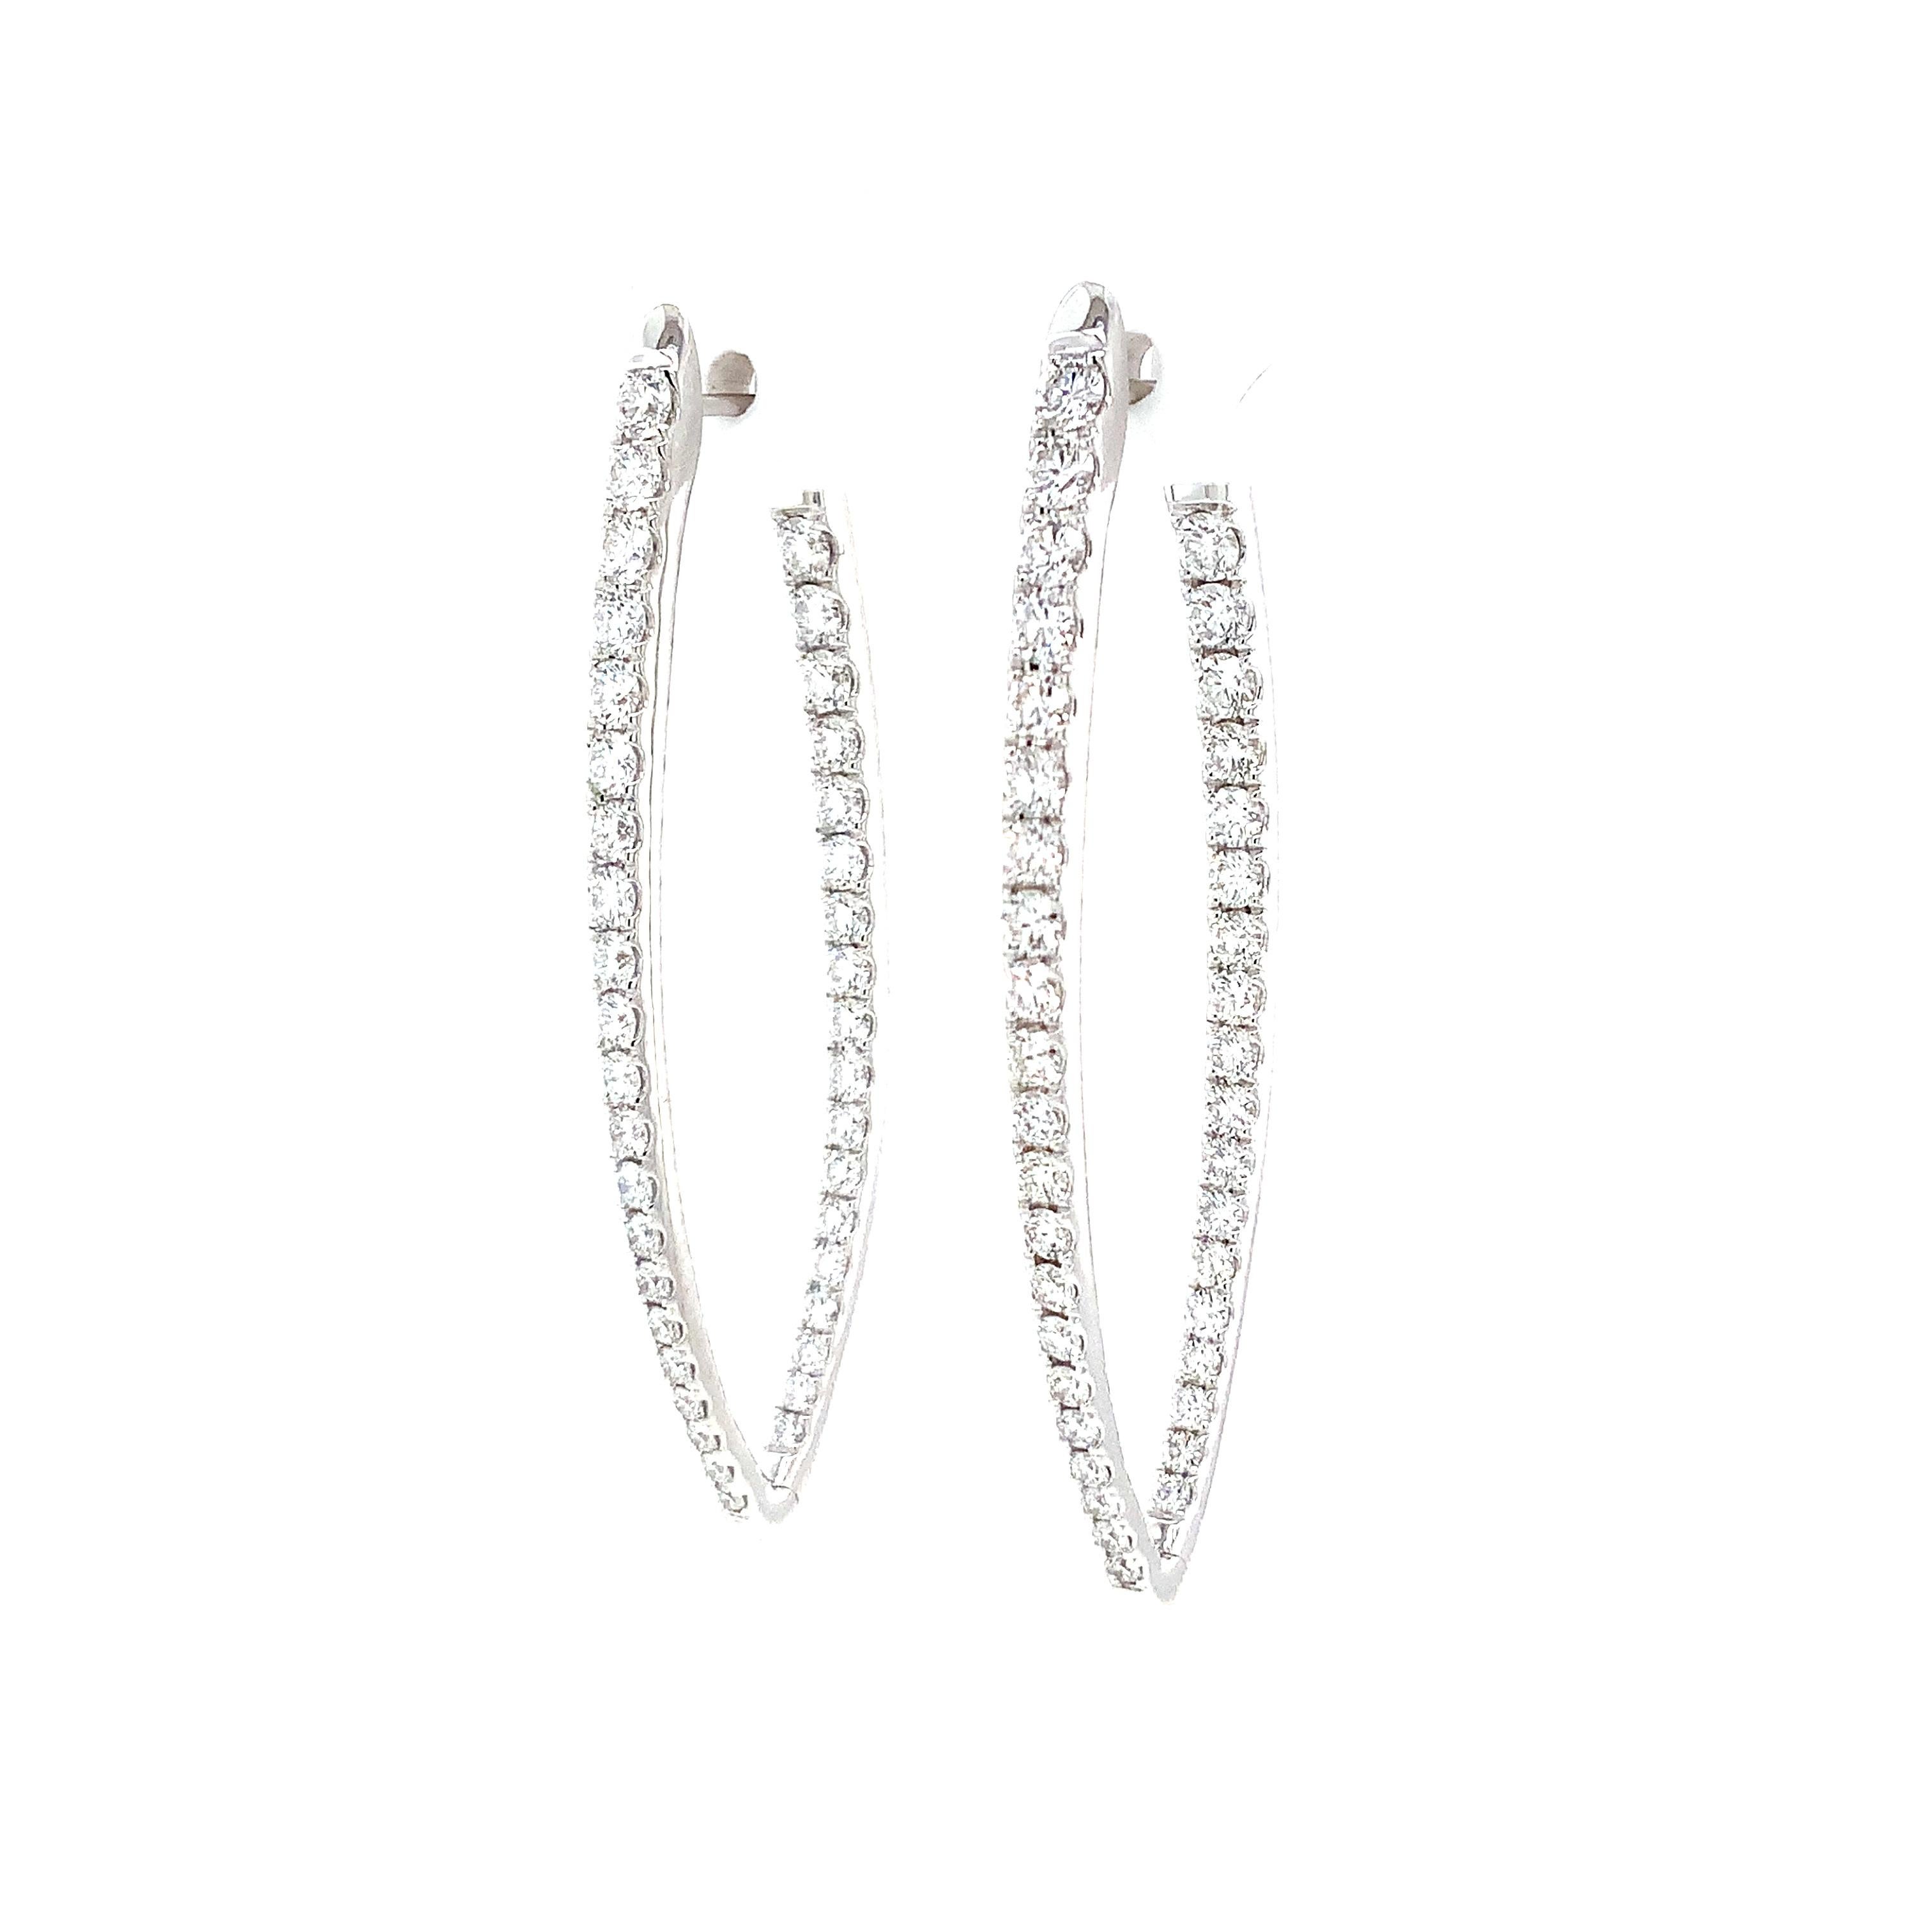 This Memoire Imperial Collection Diamond Hoop Earring Set is crafted from 18K White Gold, containing 78 Diamonds that total 2.46 carats. Of F-G Color, these Diamonds have a VS1-SI1 Clarity, with a diameter of 47mm and a width of 16mm. This Earring